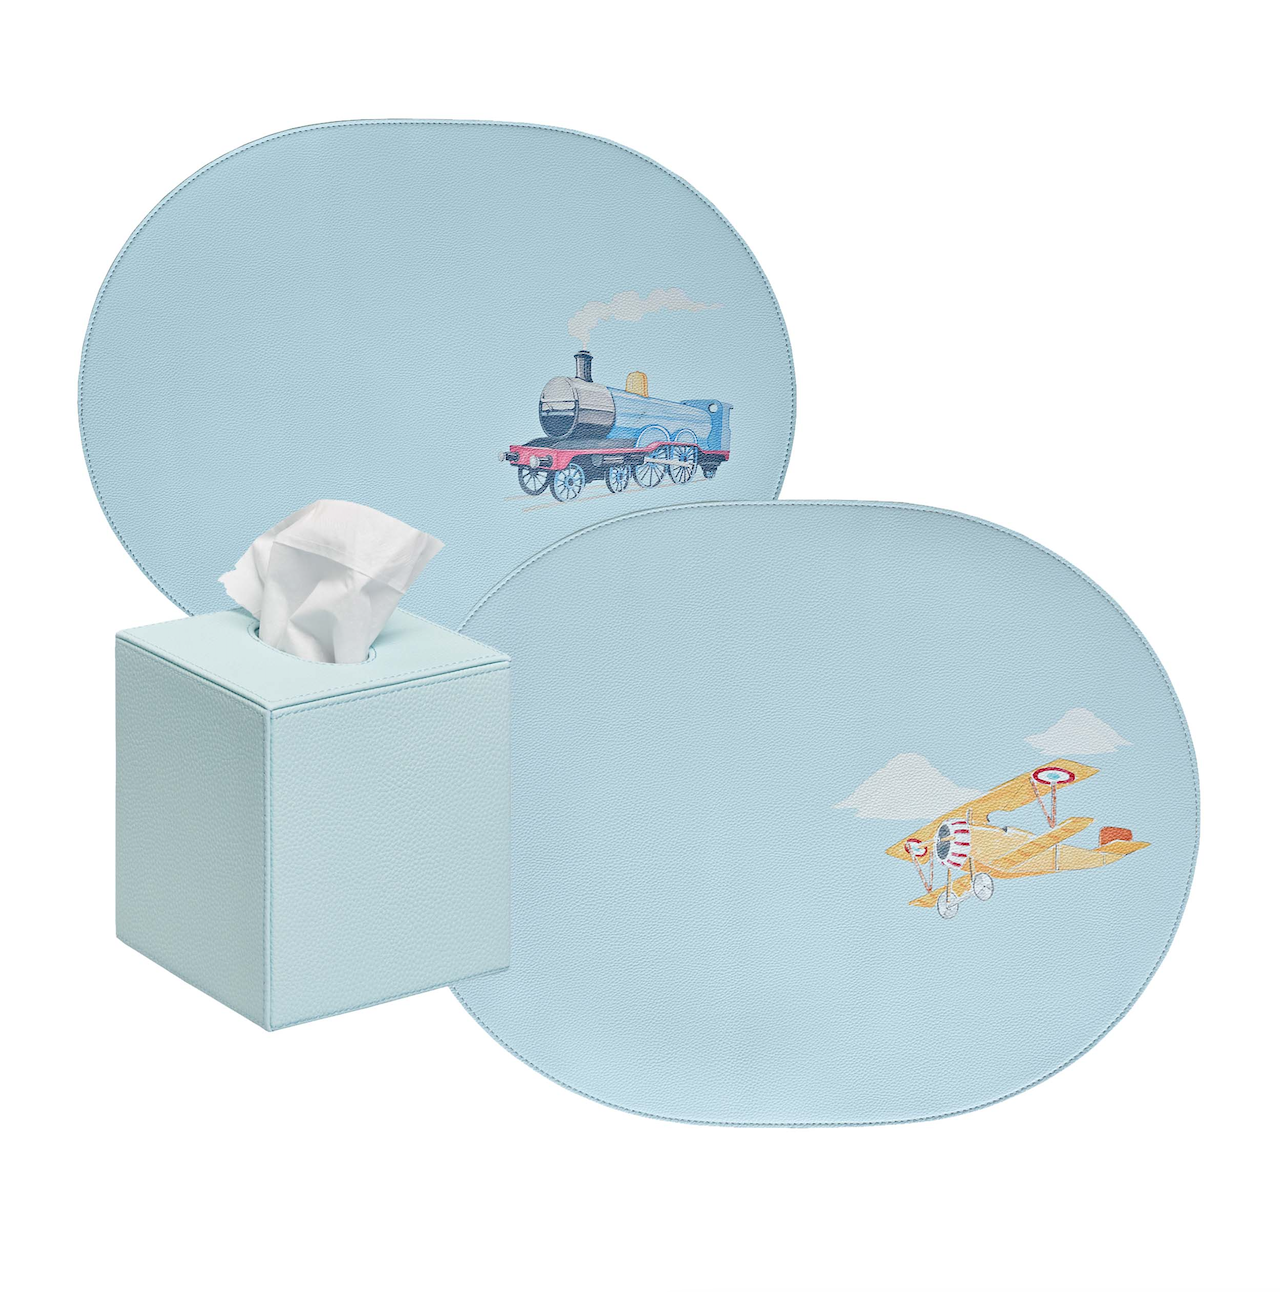 Placemat Bundle - Set of 2 Placemats and Tissue Box